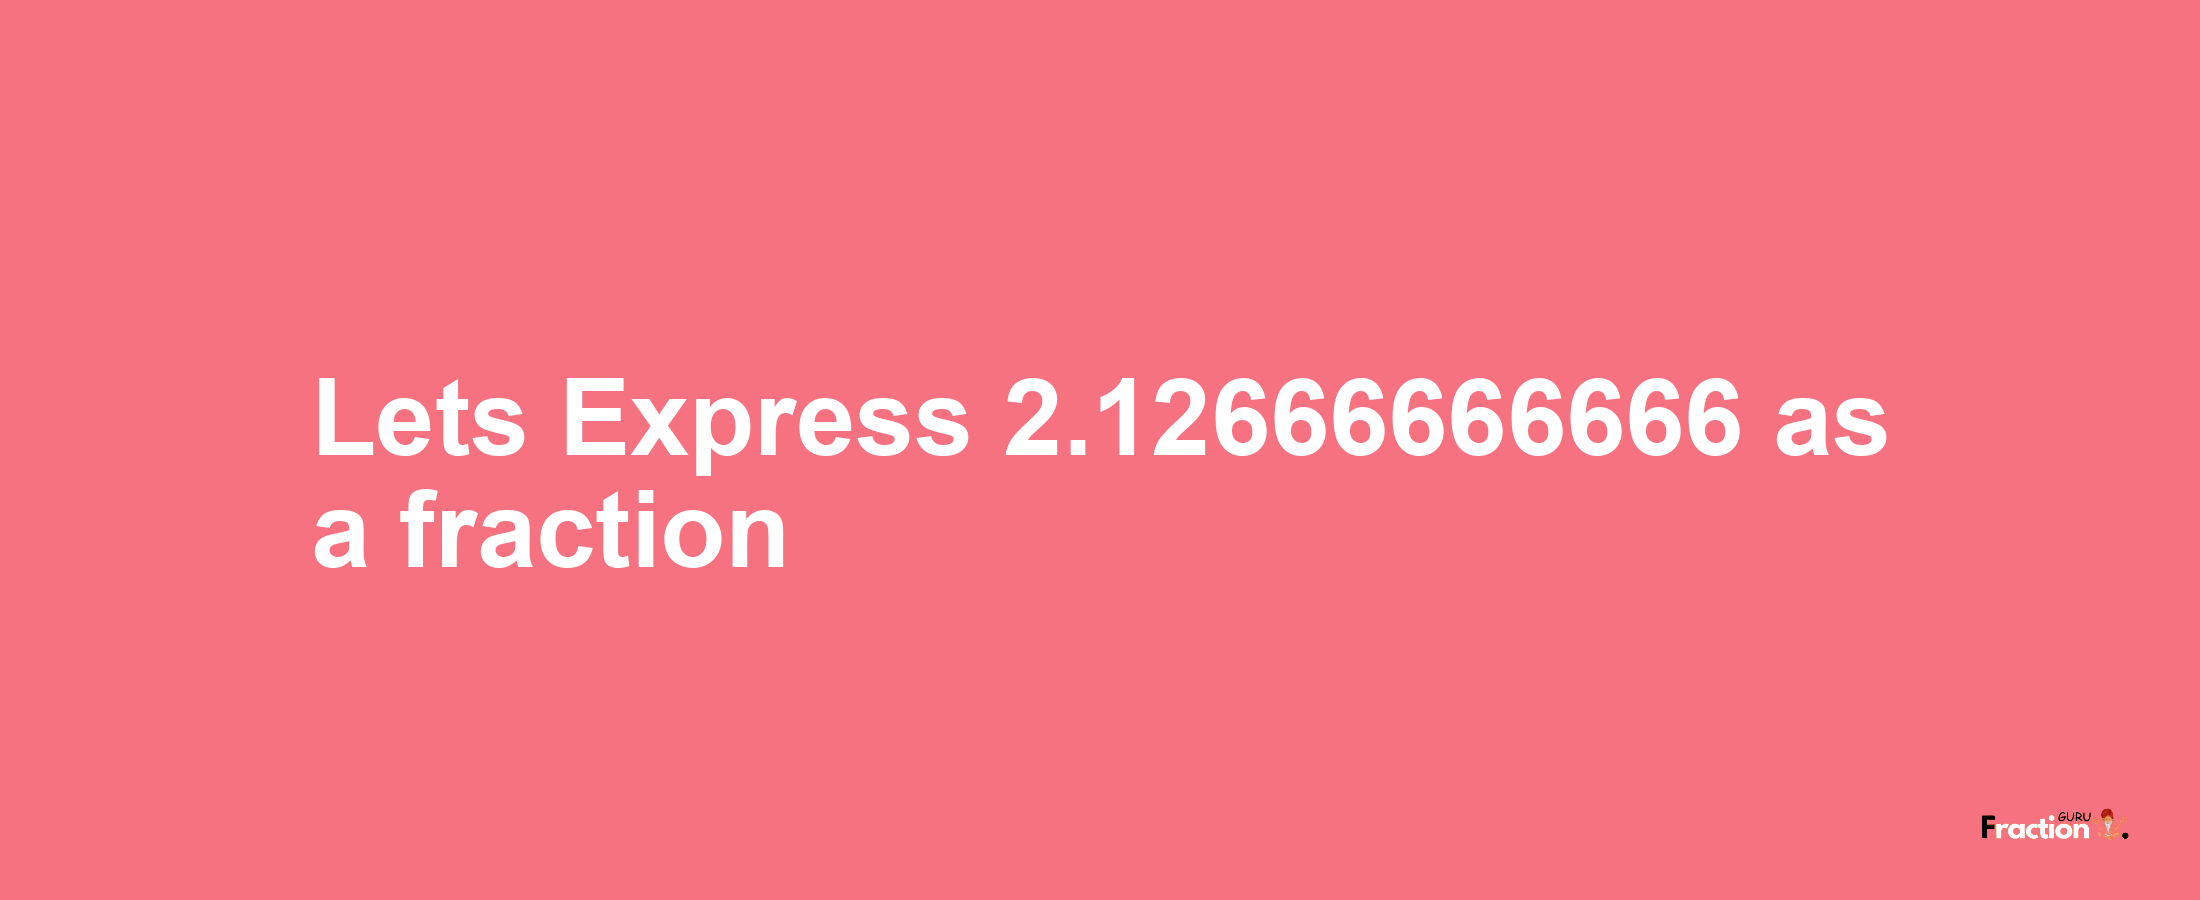 Lets Express 2.12666666666 as afraction